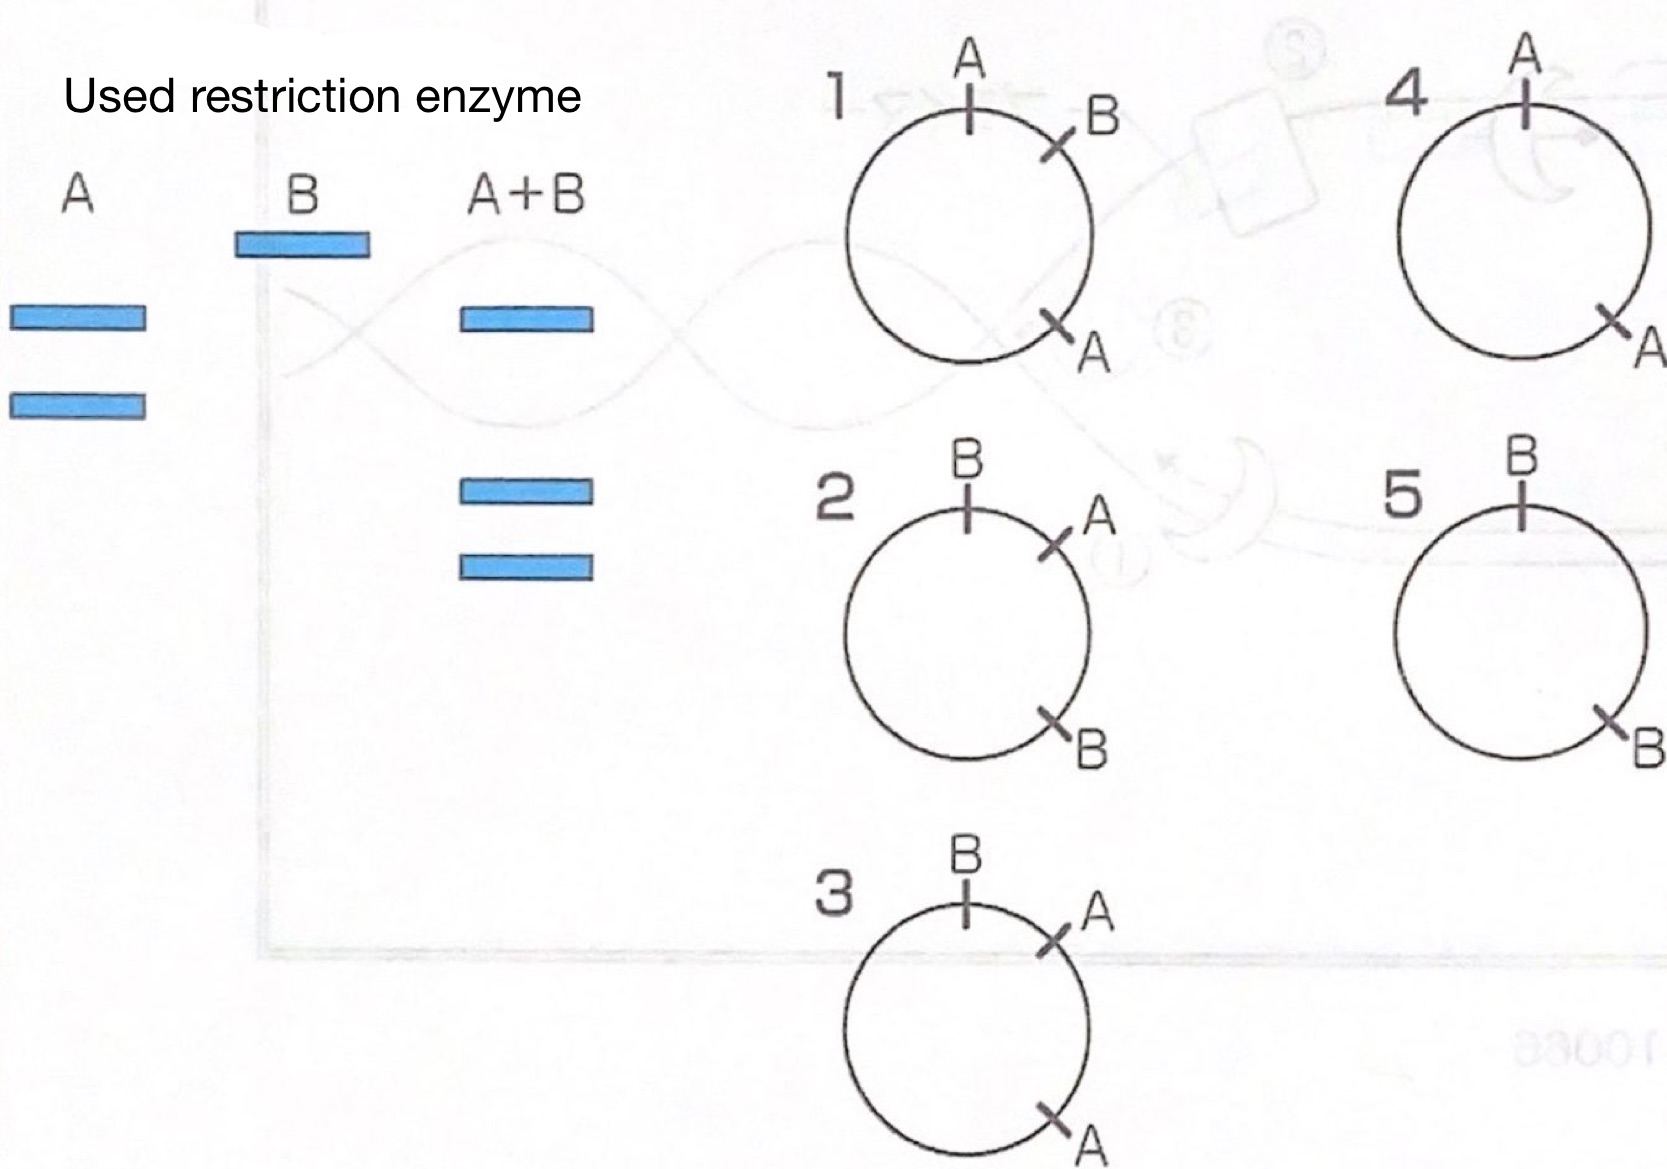 <p>219</p><p>A circular DNA was digested with restriction enzyme A and B, which was analyzed by agarose gel electrophoresis. Which is the structure of the circular DNA?</p><p></p><p>a 1</p><p>b 2</p><p>c 3</p><p>d 4</p><p>e 5</p>